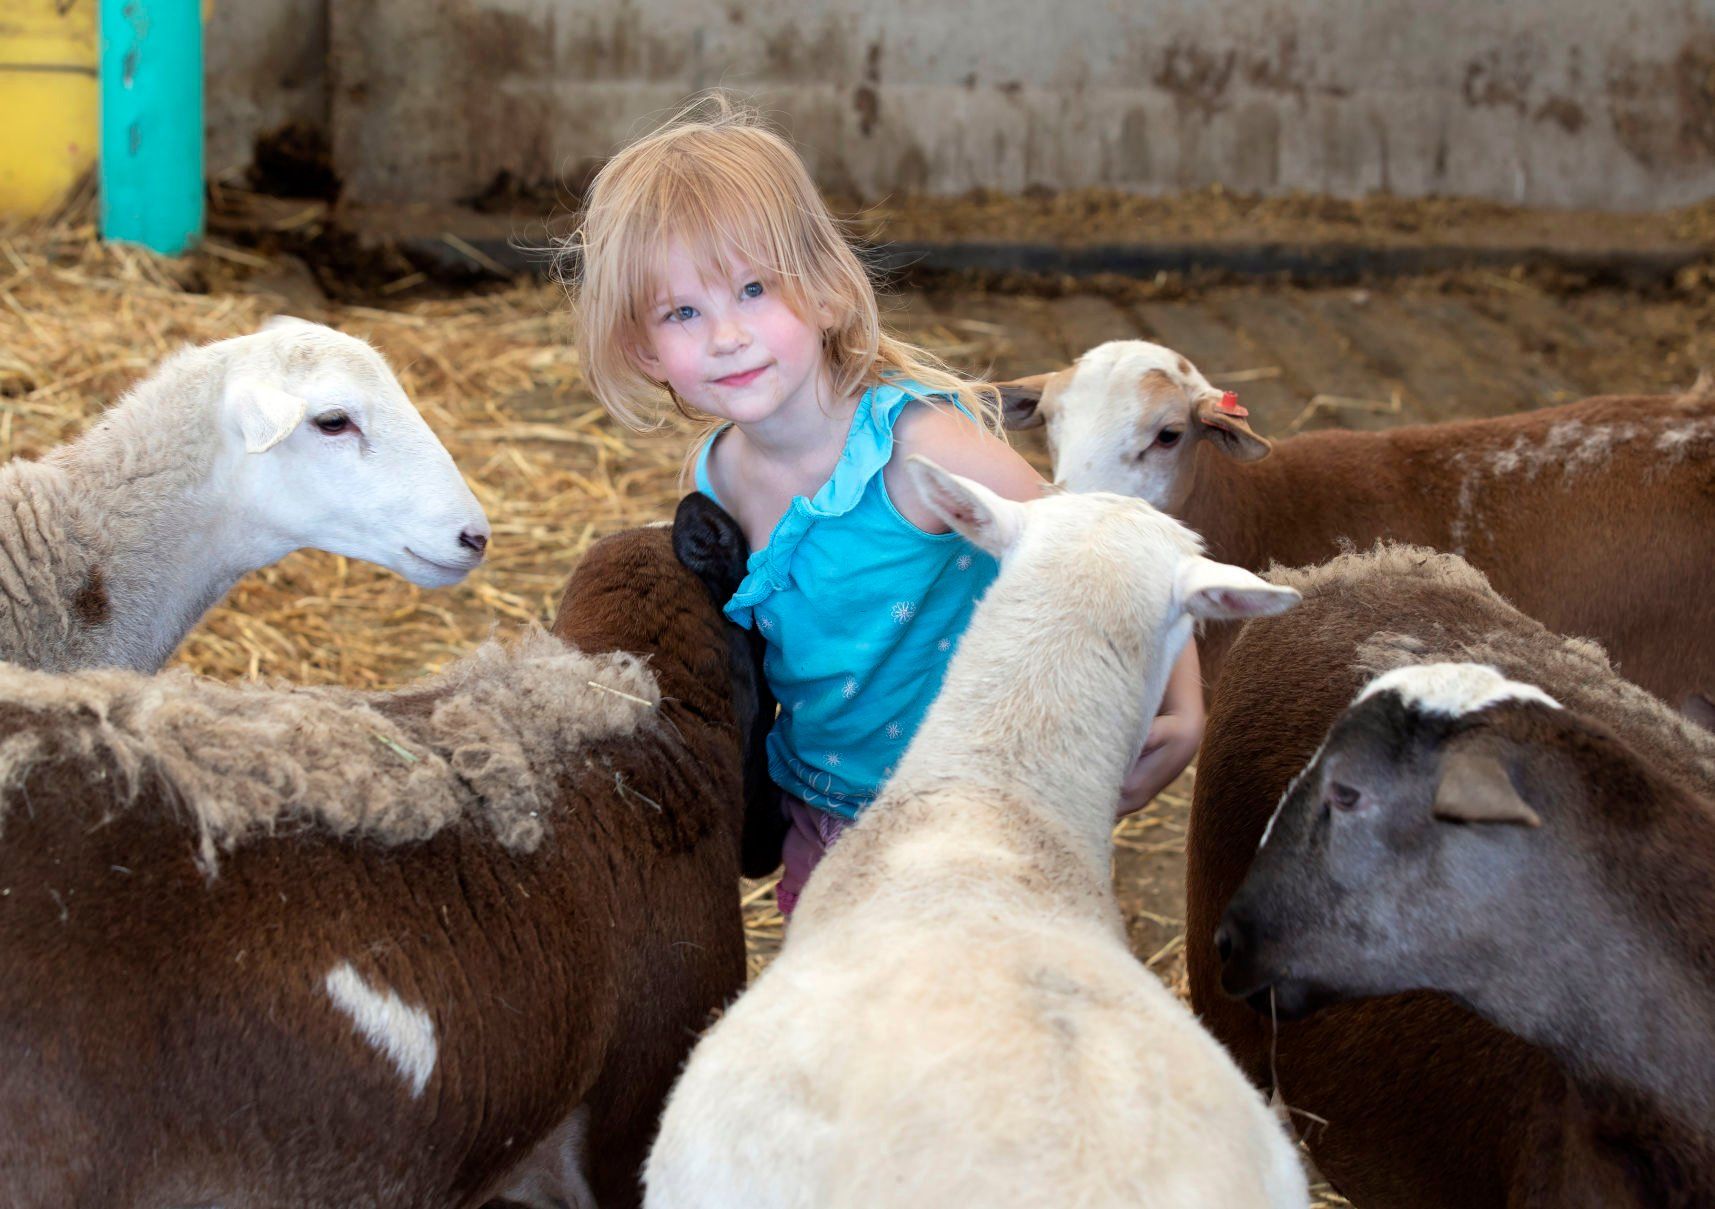 Layne Gleason, 4, surrounded by sheep on the family